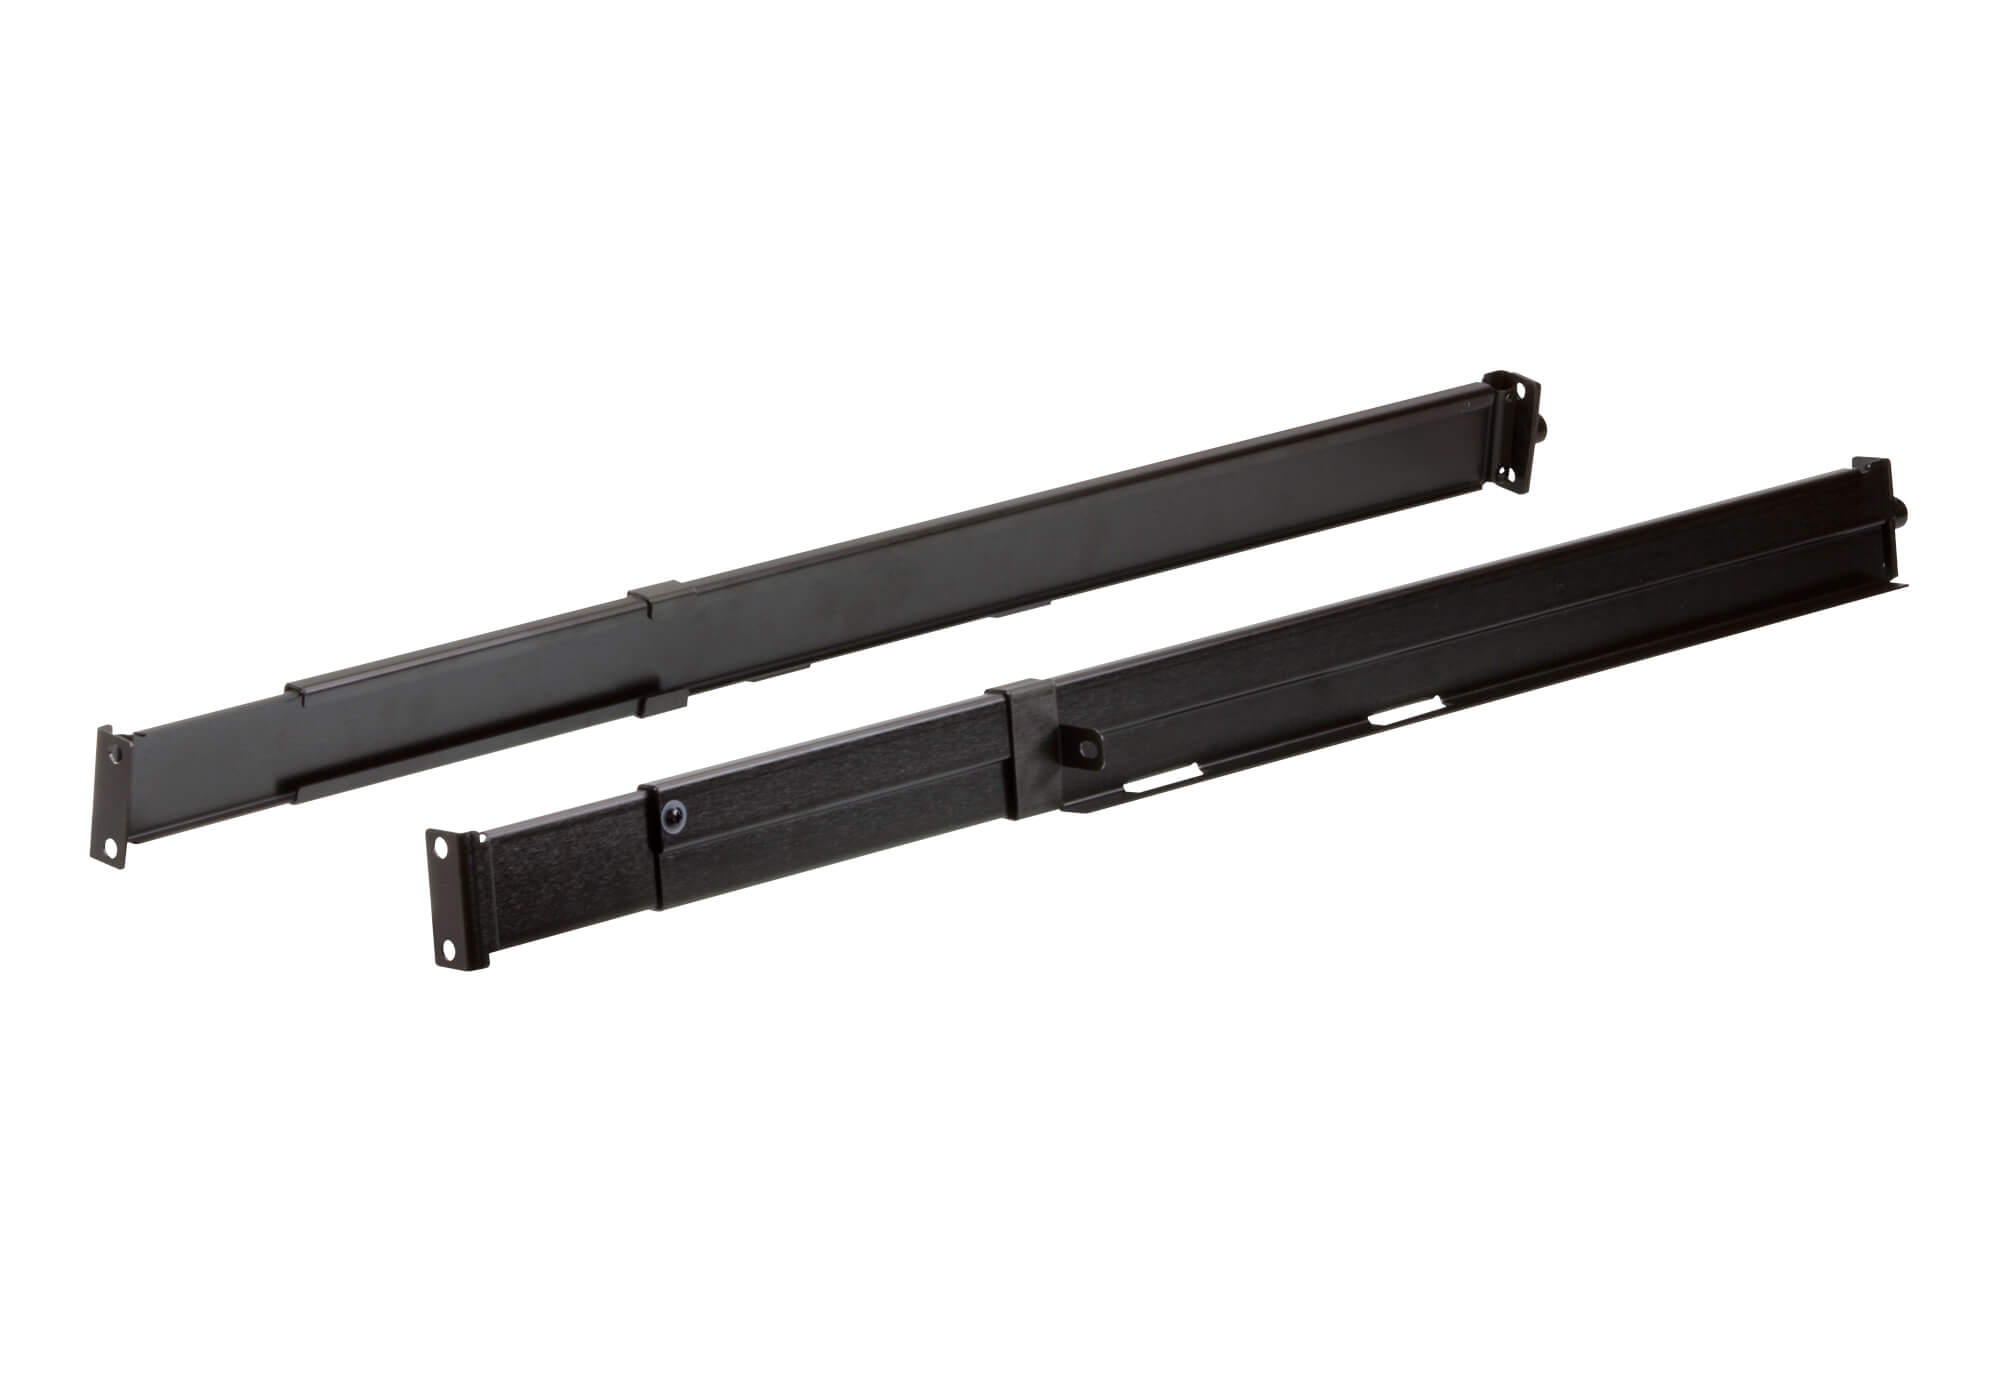 Aten Easy Installation Long Rack Mount kit for CL3800/CL3700/CL3100 from 68-105cm